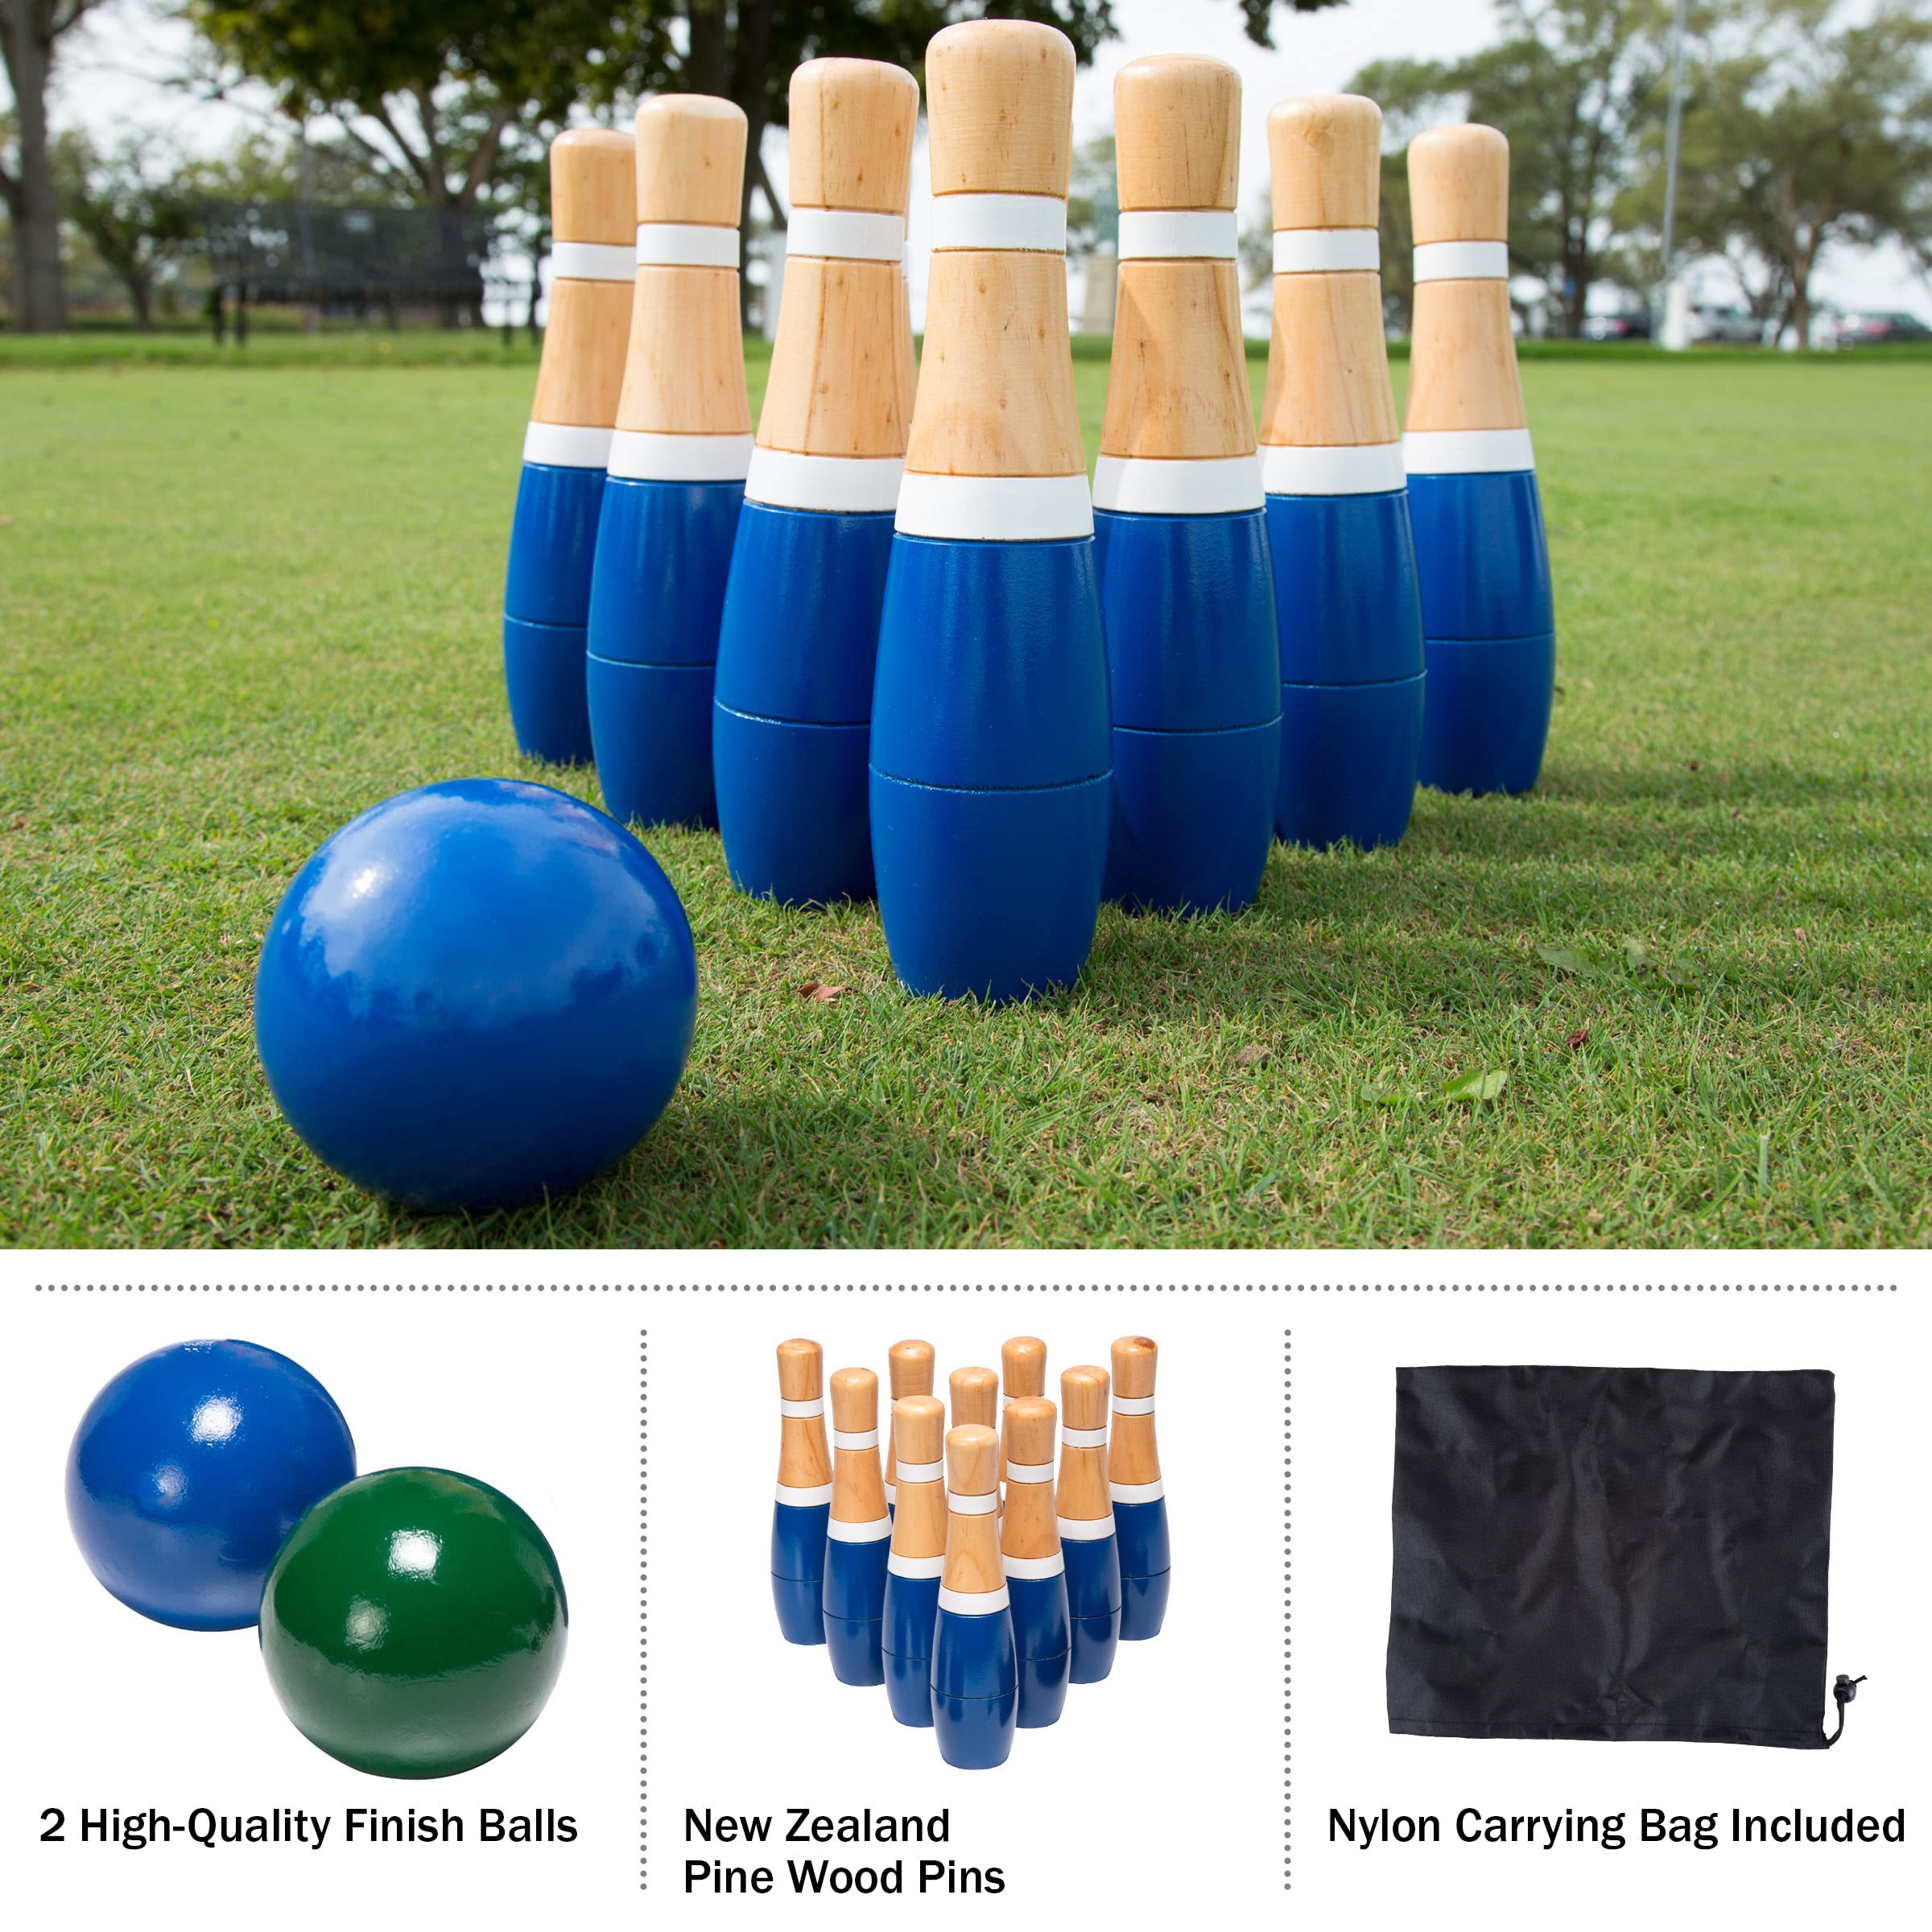 Backyard Lawn Bowling Game – Indoor and Outdoor Family Fun for Kids and Adults – 10 Wooden Pins, 2 Balls, and Mesh Carrying Bag by Hey! Play! (8-Inch)